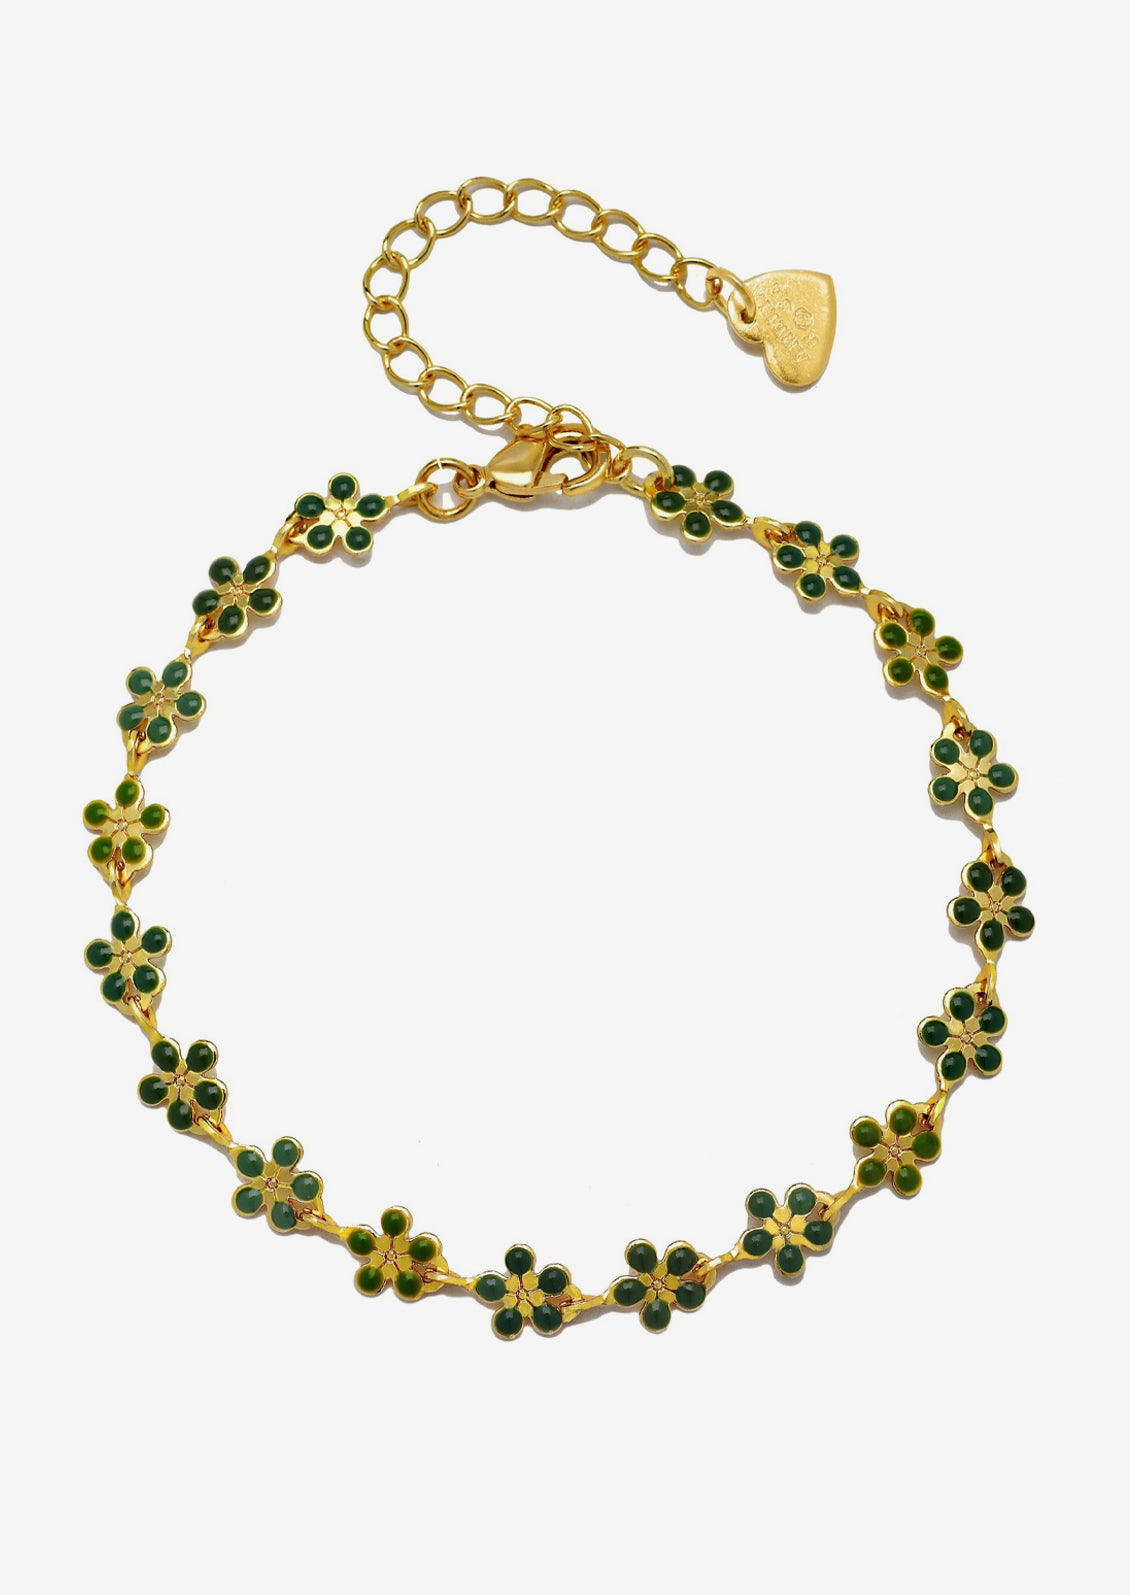 A gold bracelet with allover small enameled flowers in green.